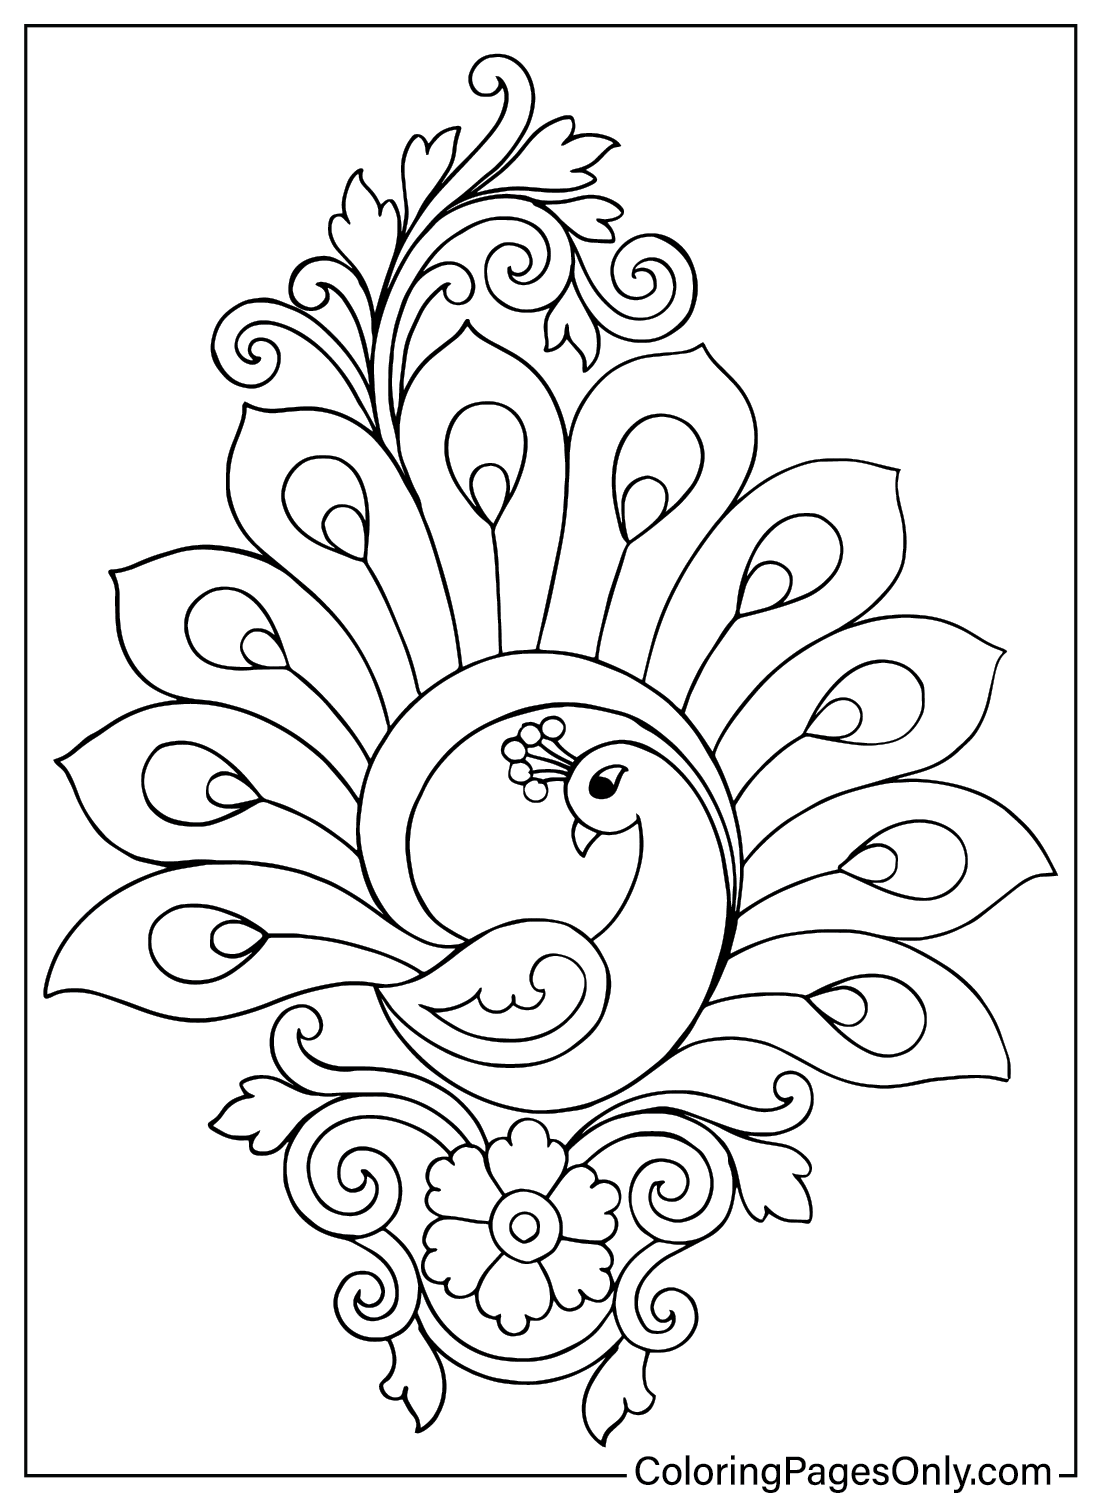 Coloring pages only on x rangoli is not just an art form its a celebration of diversity and creativity httpstcounlwxsp rangoli coloringpagesonly coloringpages coloringbook art fanart sketch drawing draw coloring usa trend